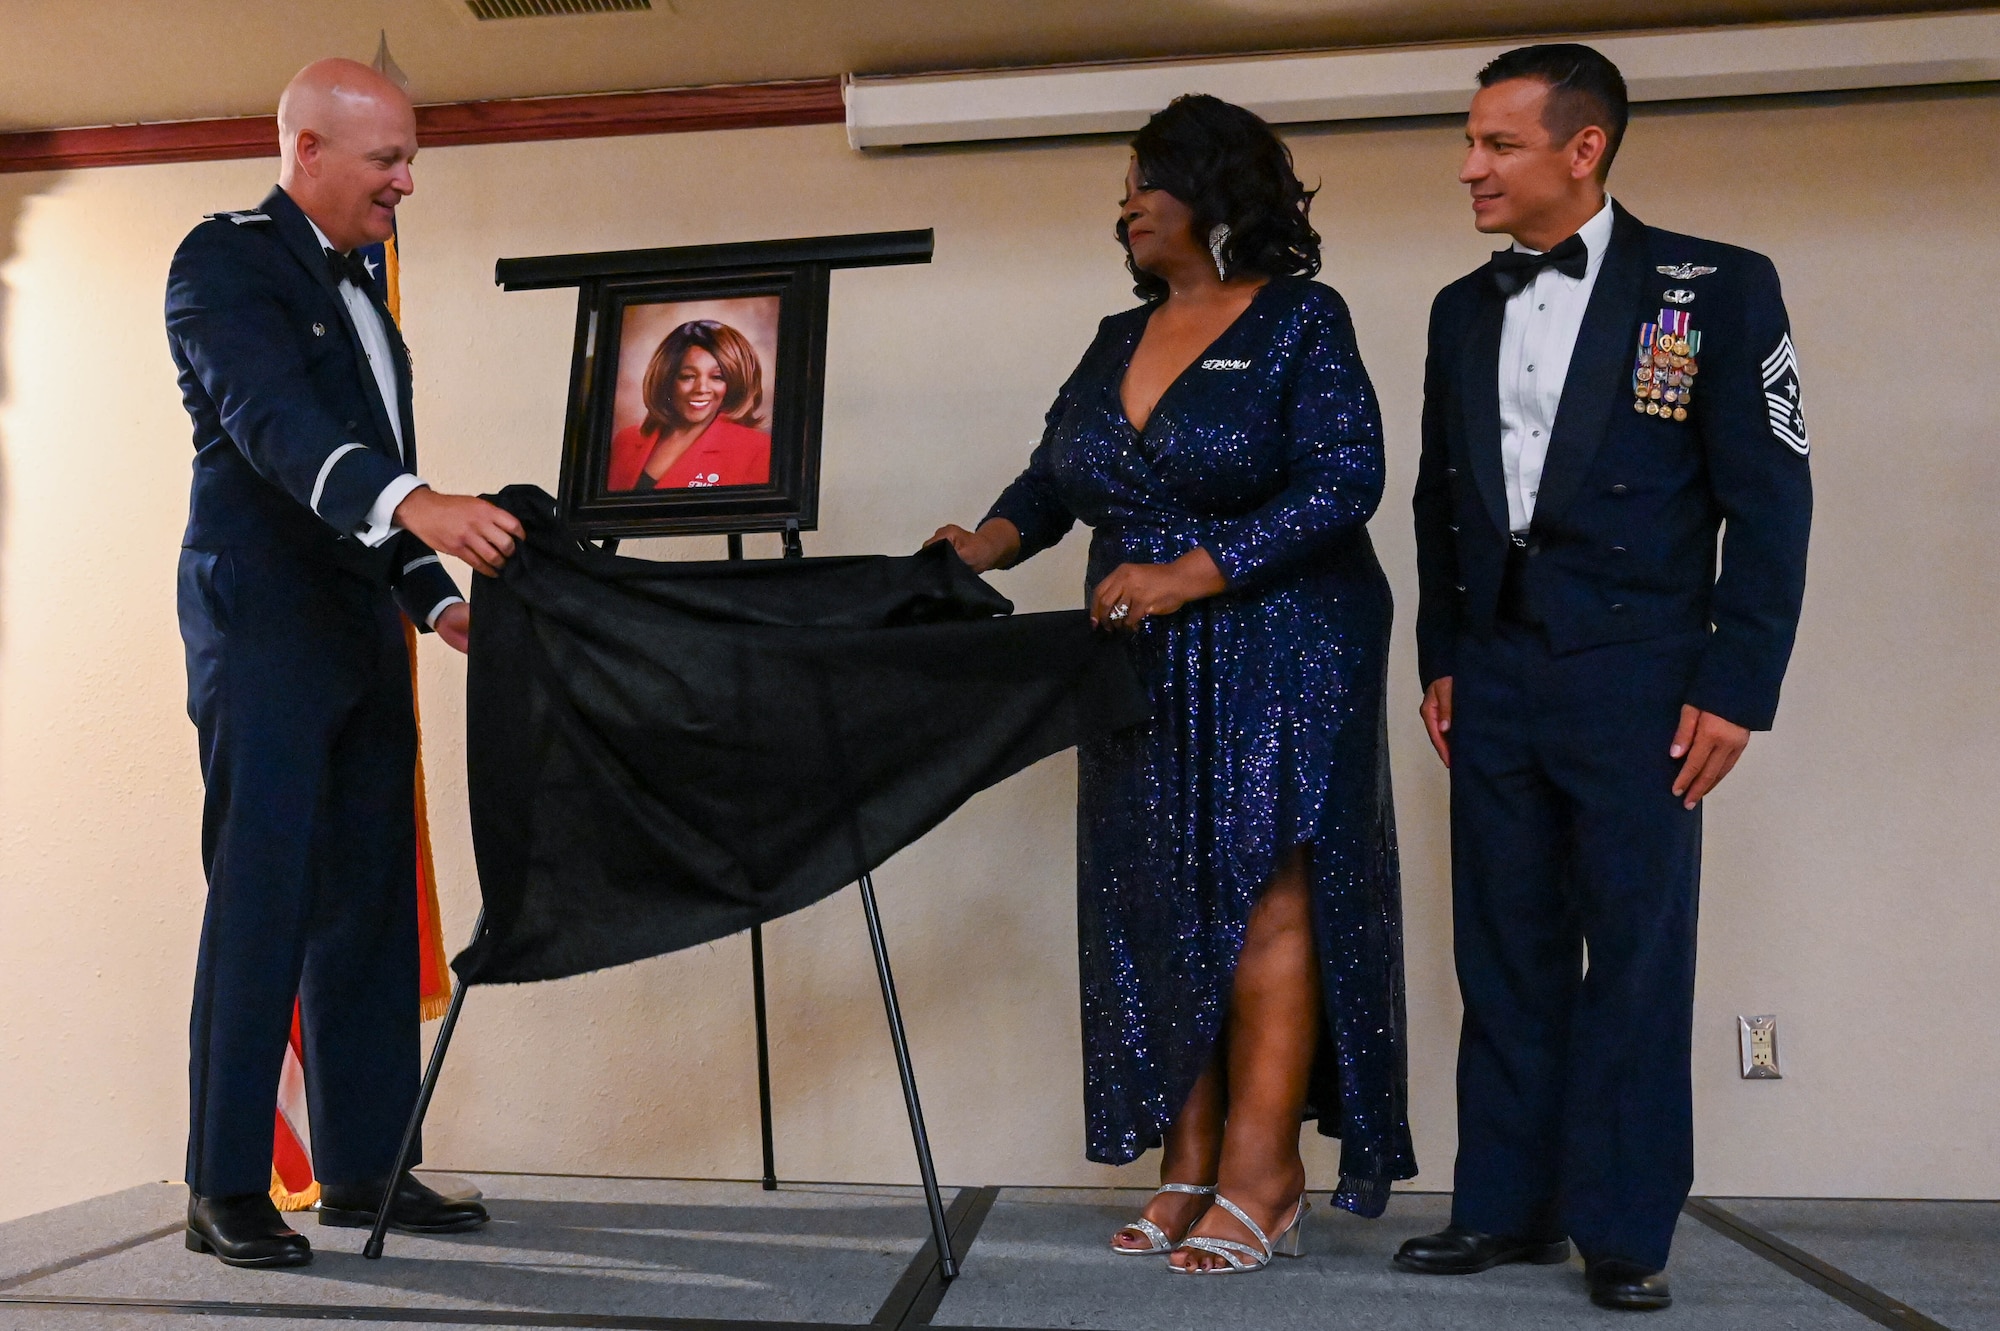 U.S. Air Force Col. Blaine Baker, 97th Air Mobility Wing commander (left) and Roberta Brady-Lee, vice mayor of Altus, unveil her portrait during the Friends of Altus induction at Altus Air Force Base, Oklahoma July 11, 2023. Brady-Lee has supported Altus Air Force Base Airmen as a keynote speaker focusing on diversity and inclusion. (U.S. Air Force photo by Airman 1st Class Heidi Bucins)